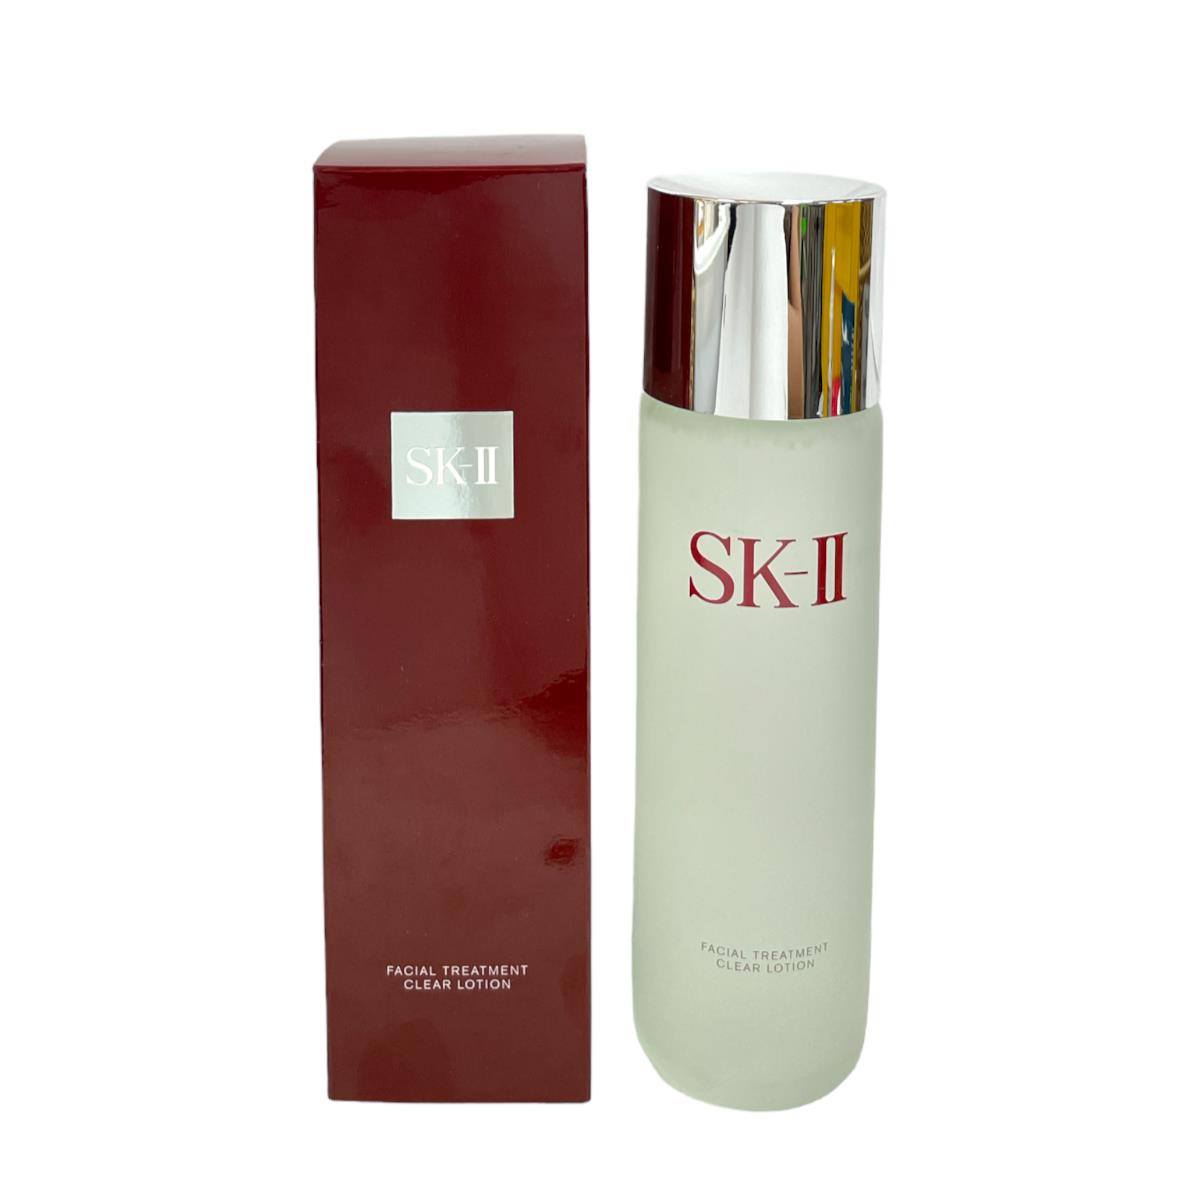 Sk-ii Facial Treatment Clear Lotion 230mL AS Seen IN Pictures